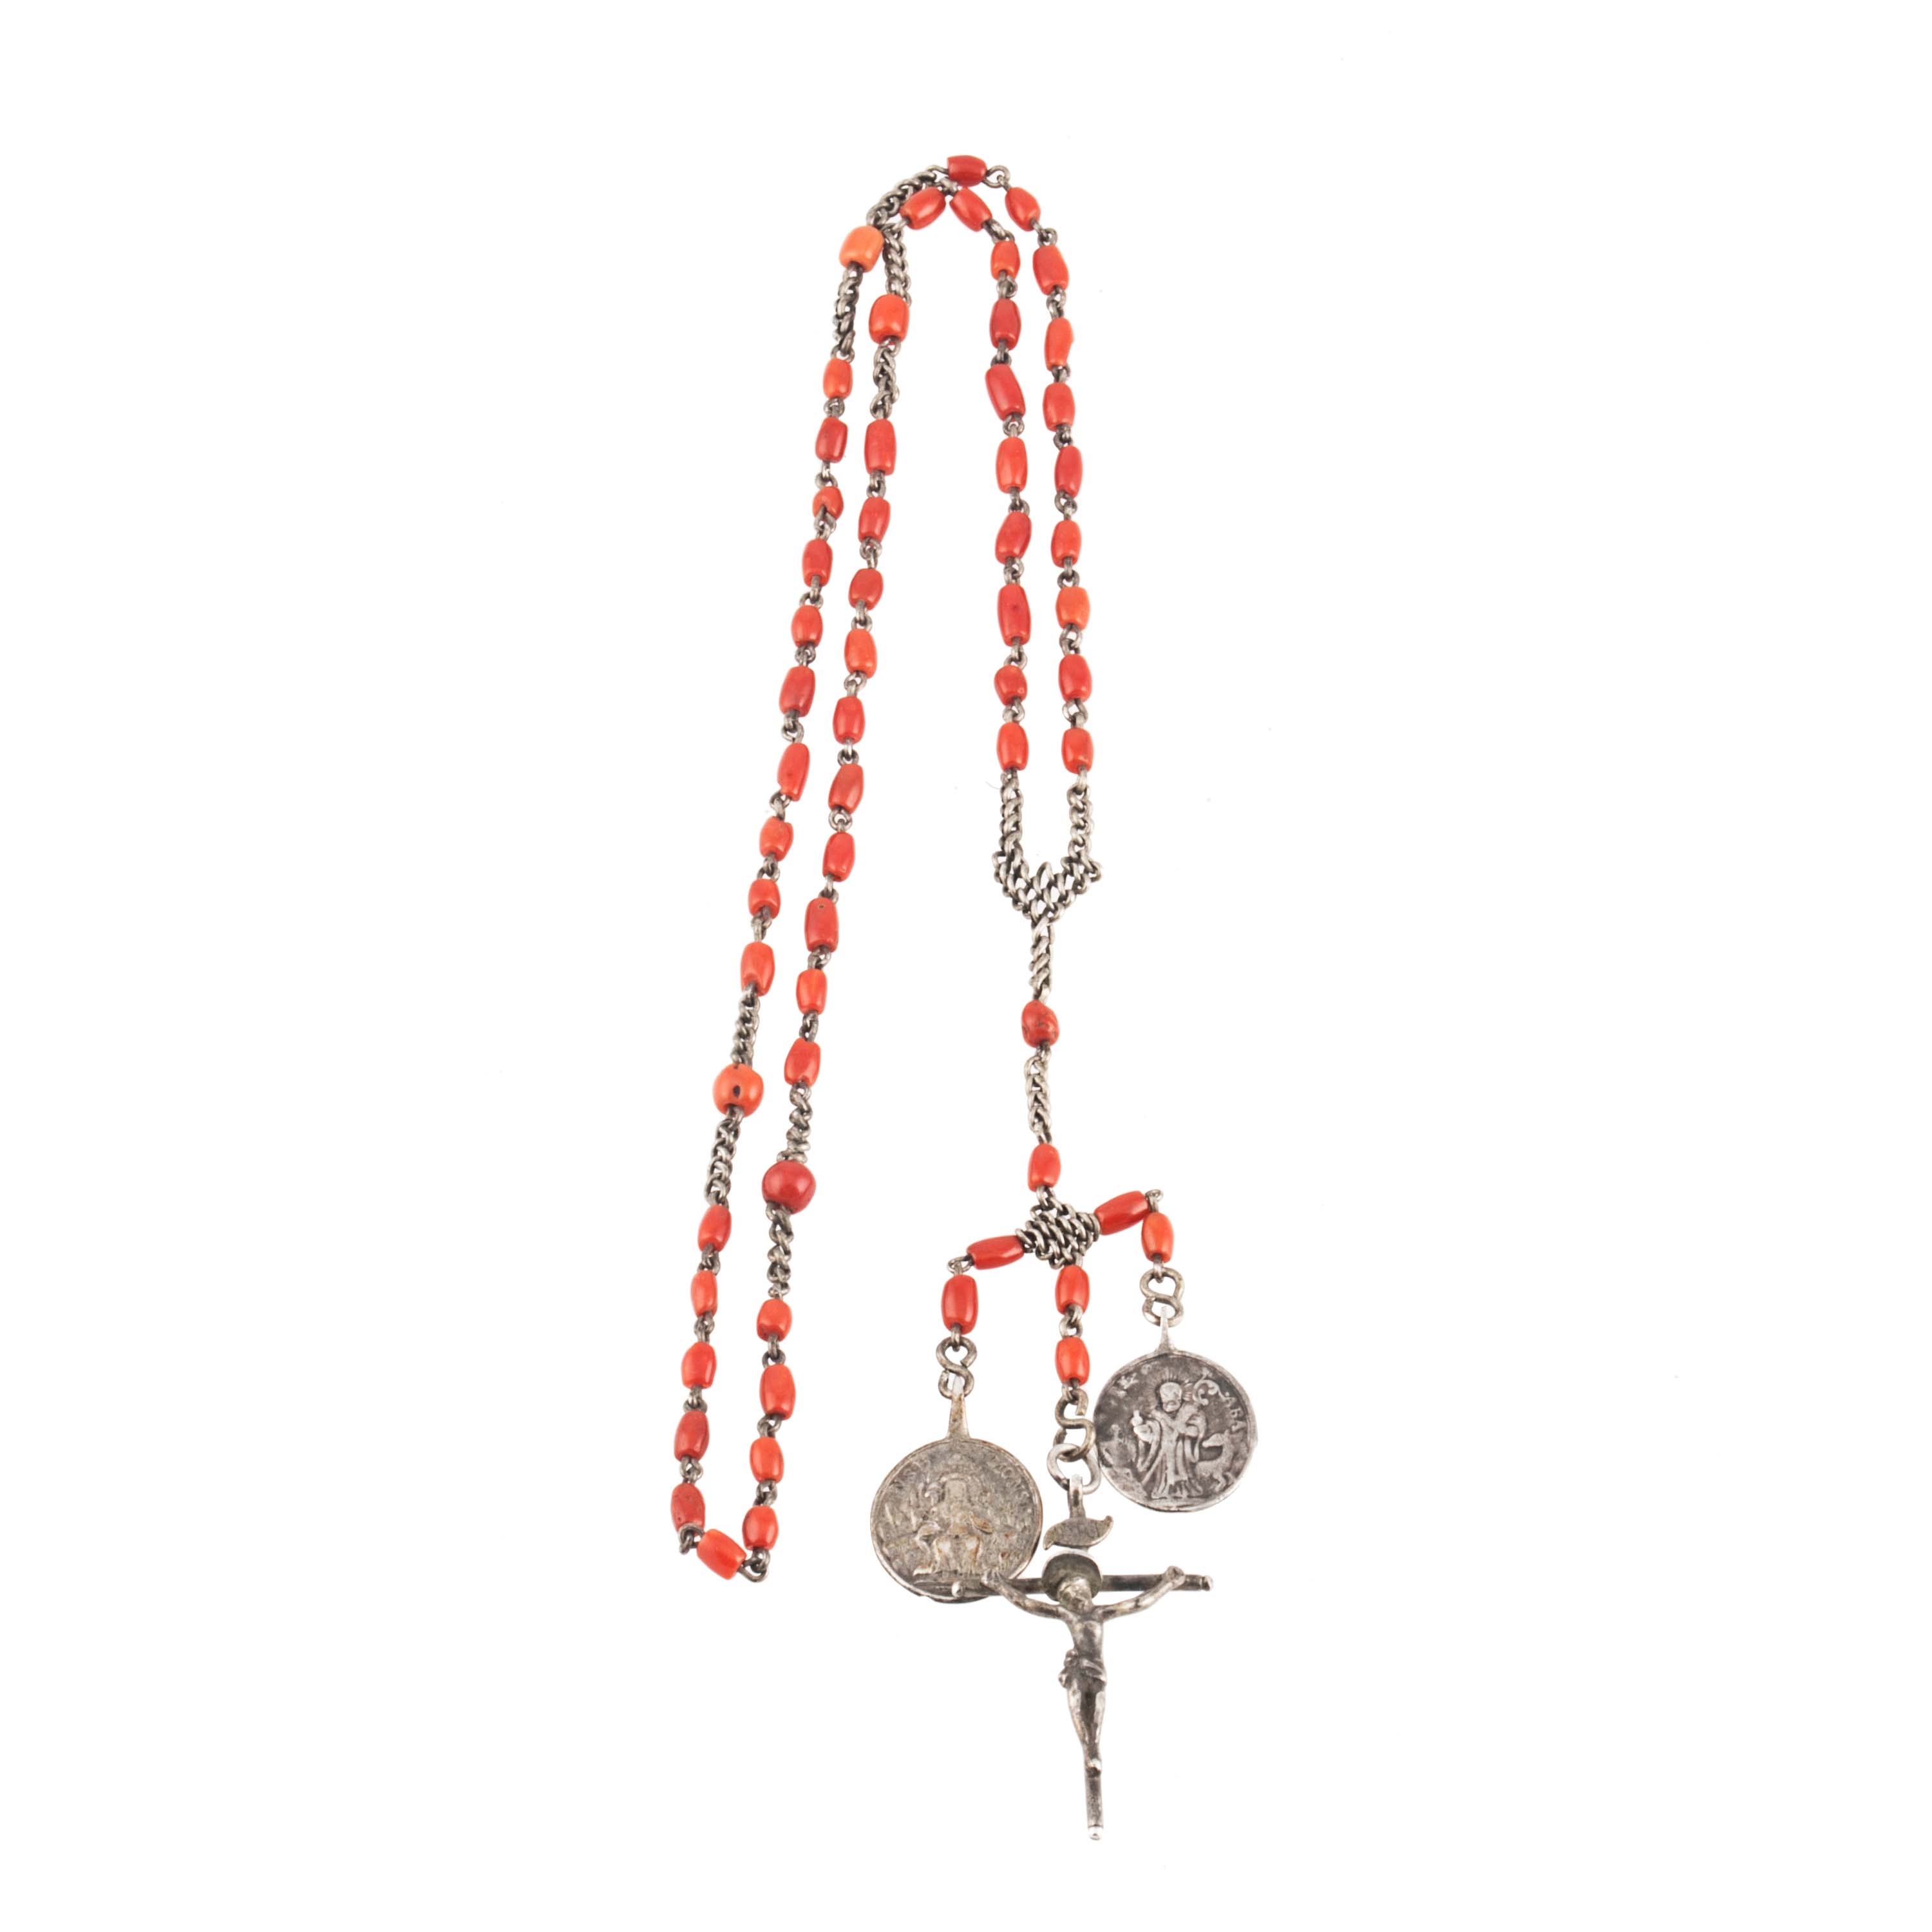 CORAL AND SILVER ROSARY.